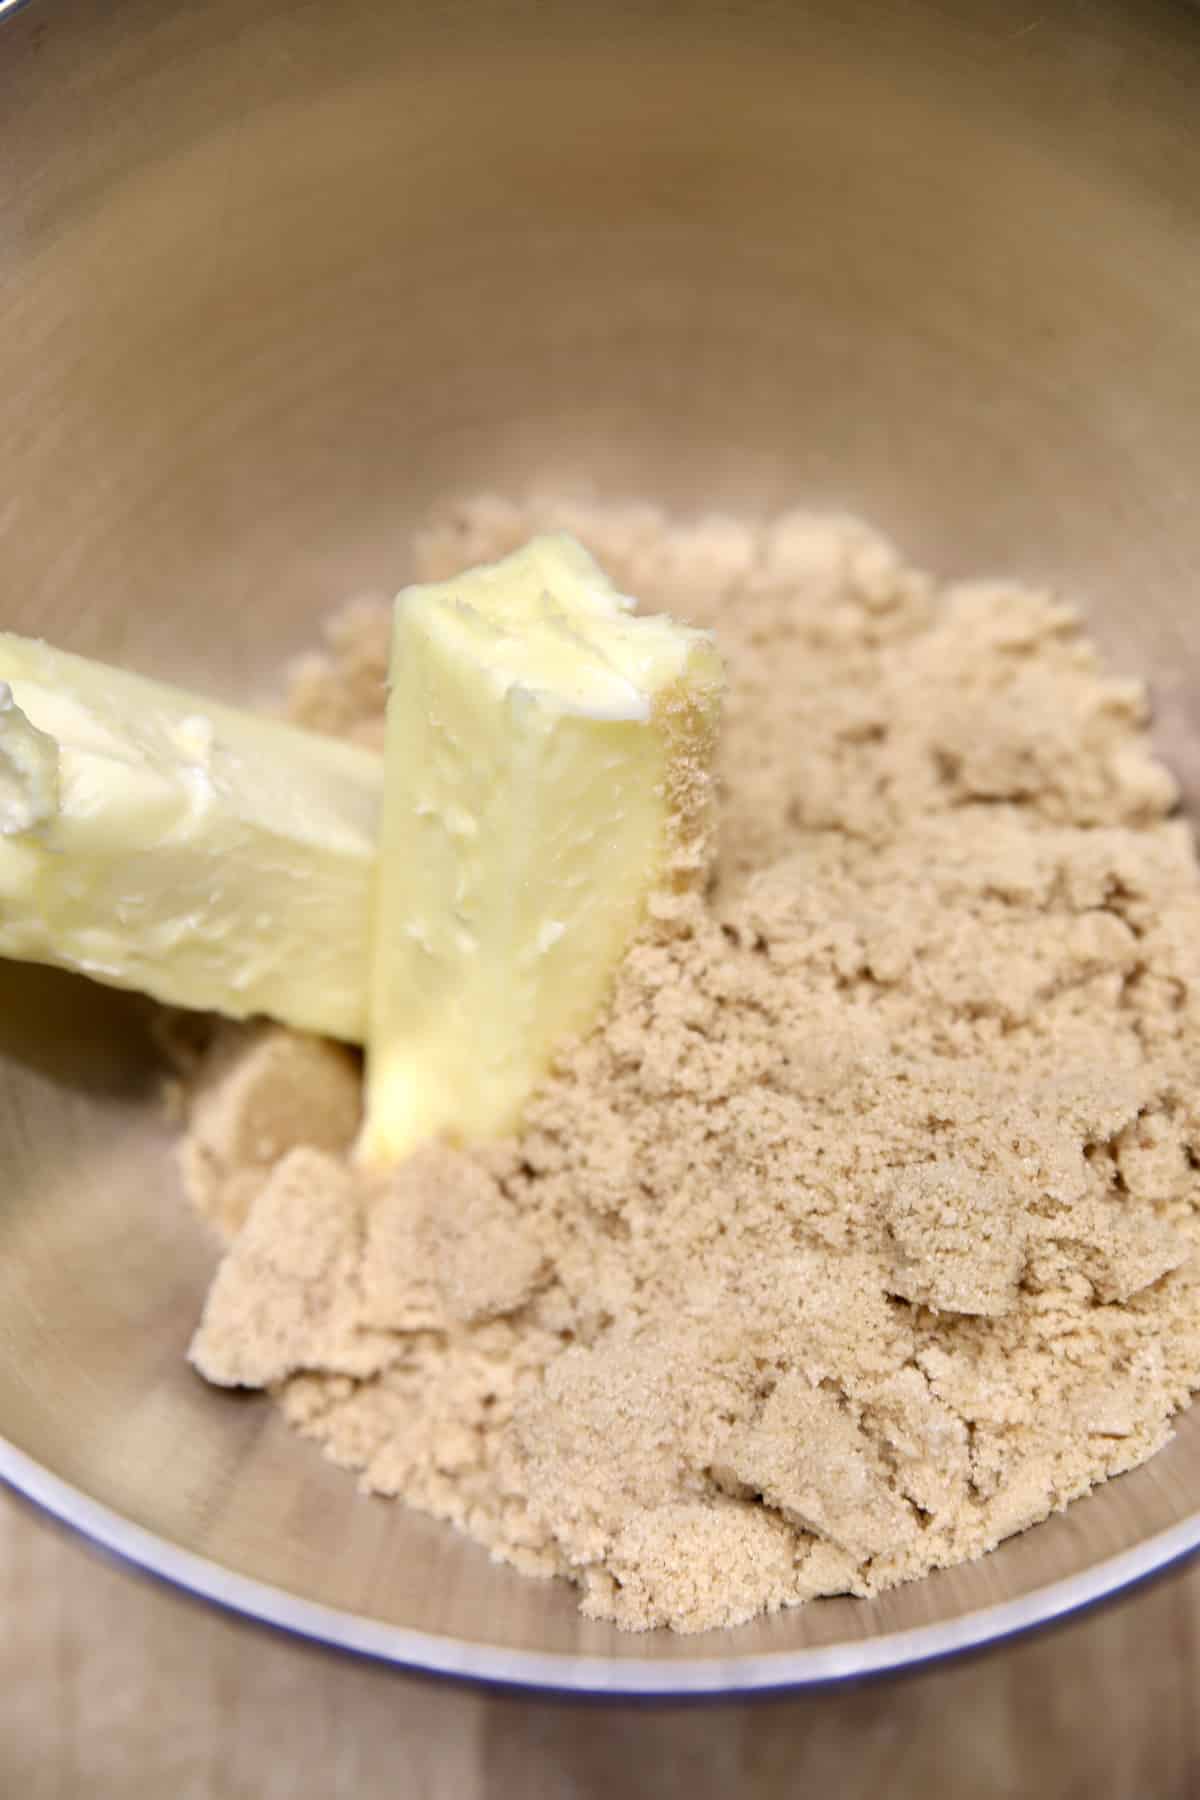 Butter and brown sugar in a mixer bowl.